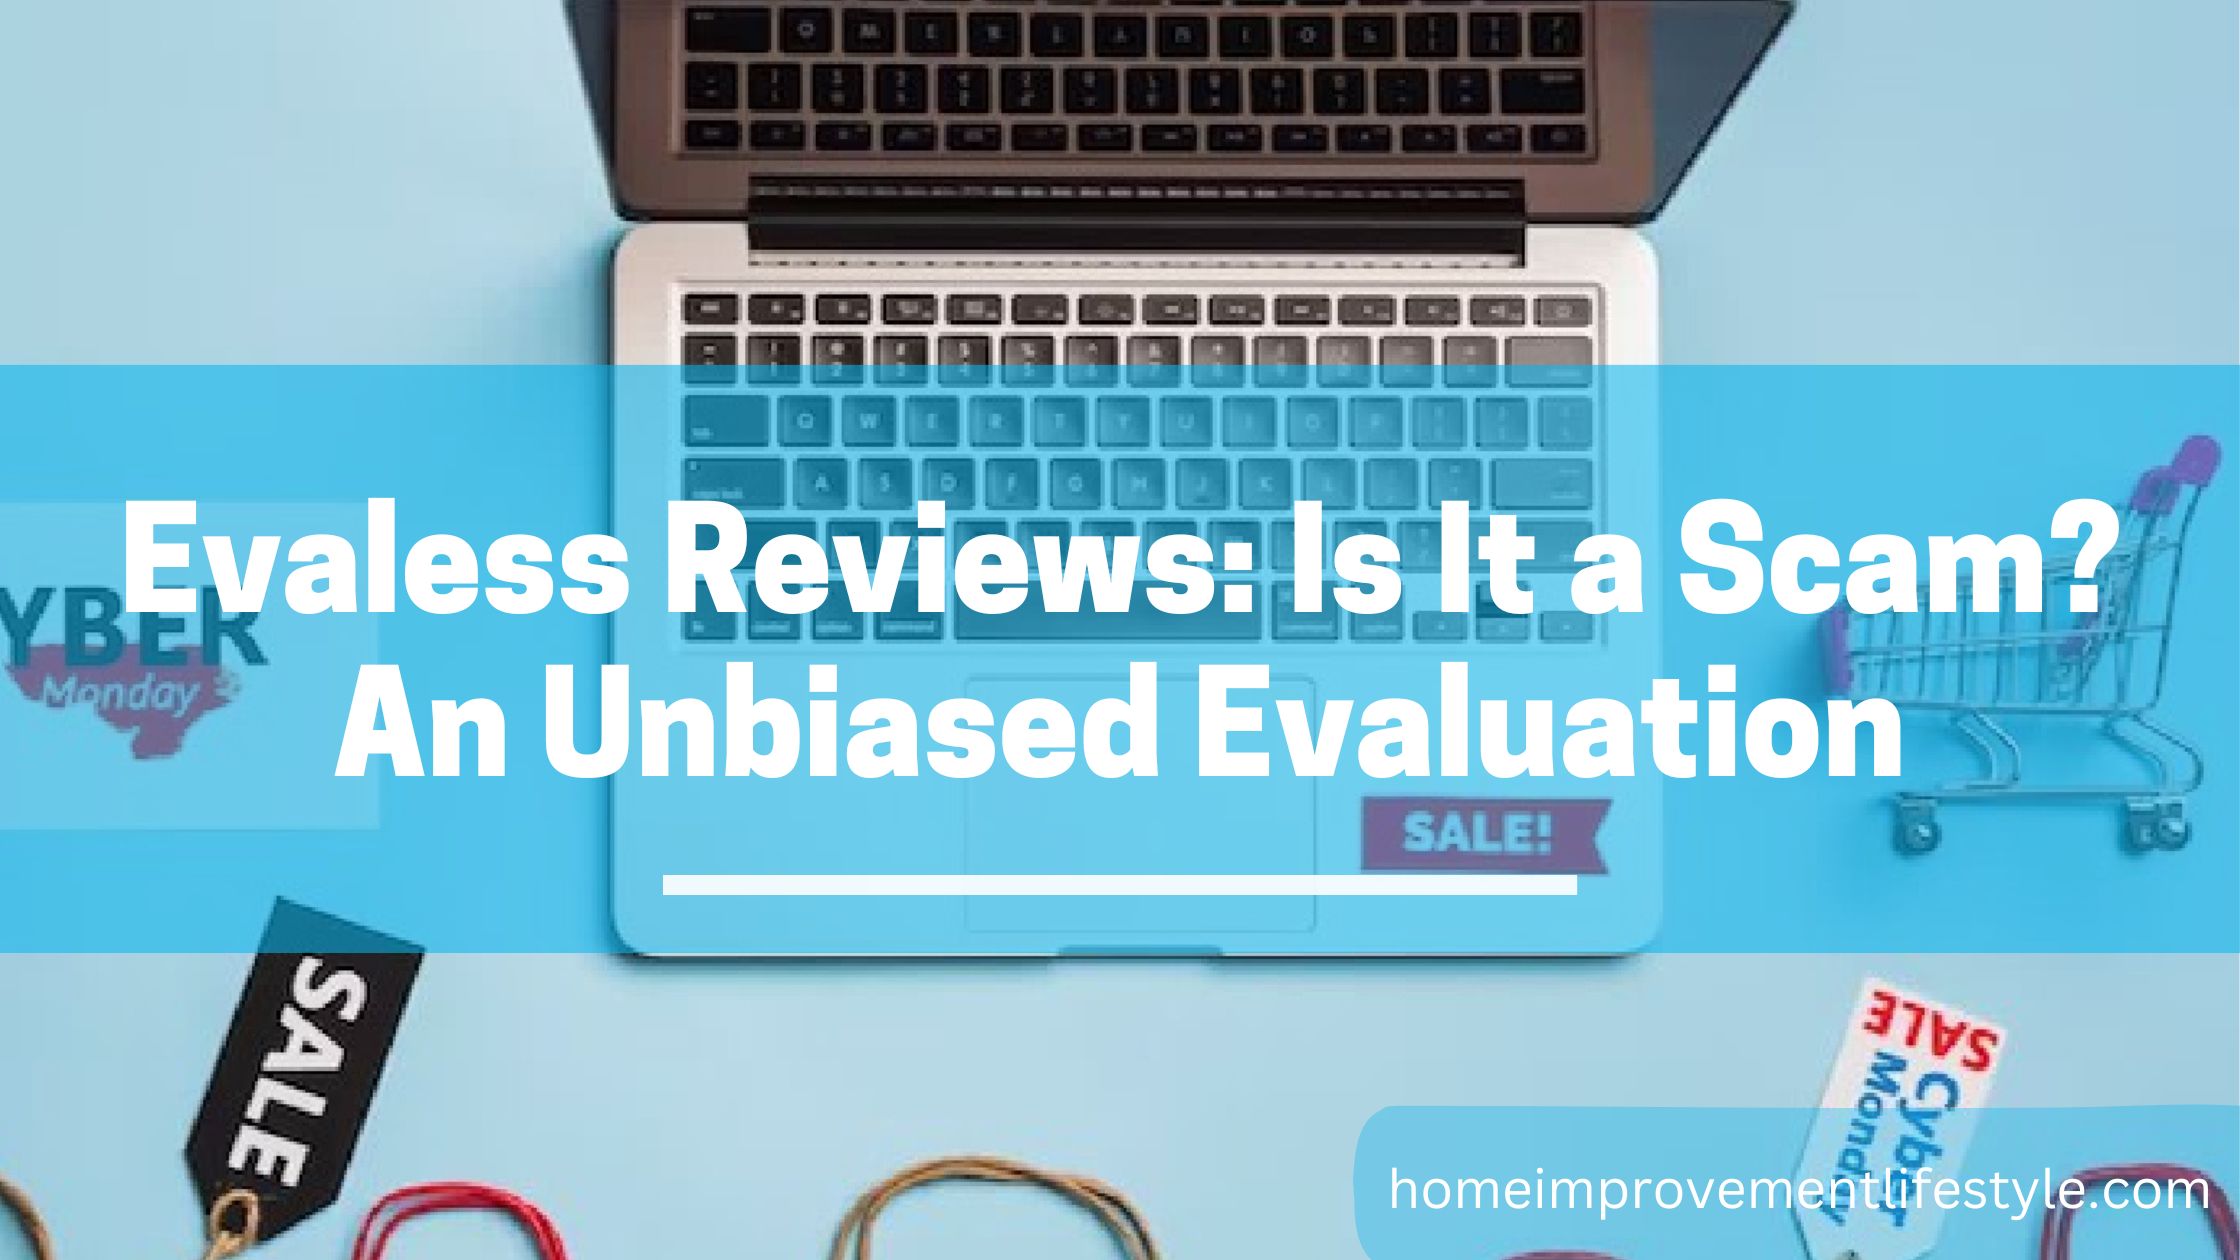 Evaless Reviews: Is It a Scam? An Unbiased Evaluation